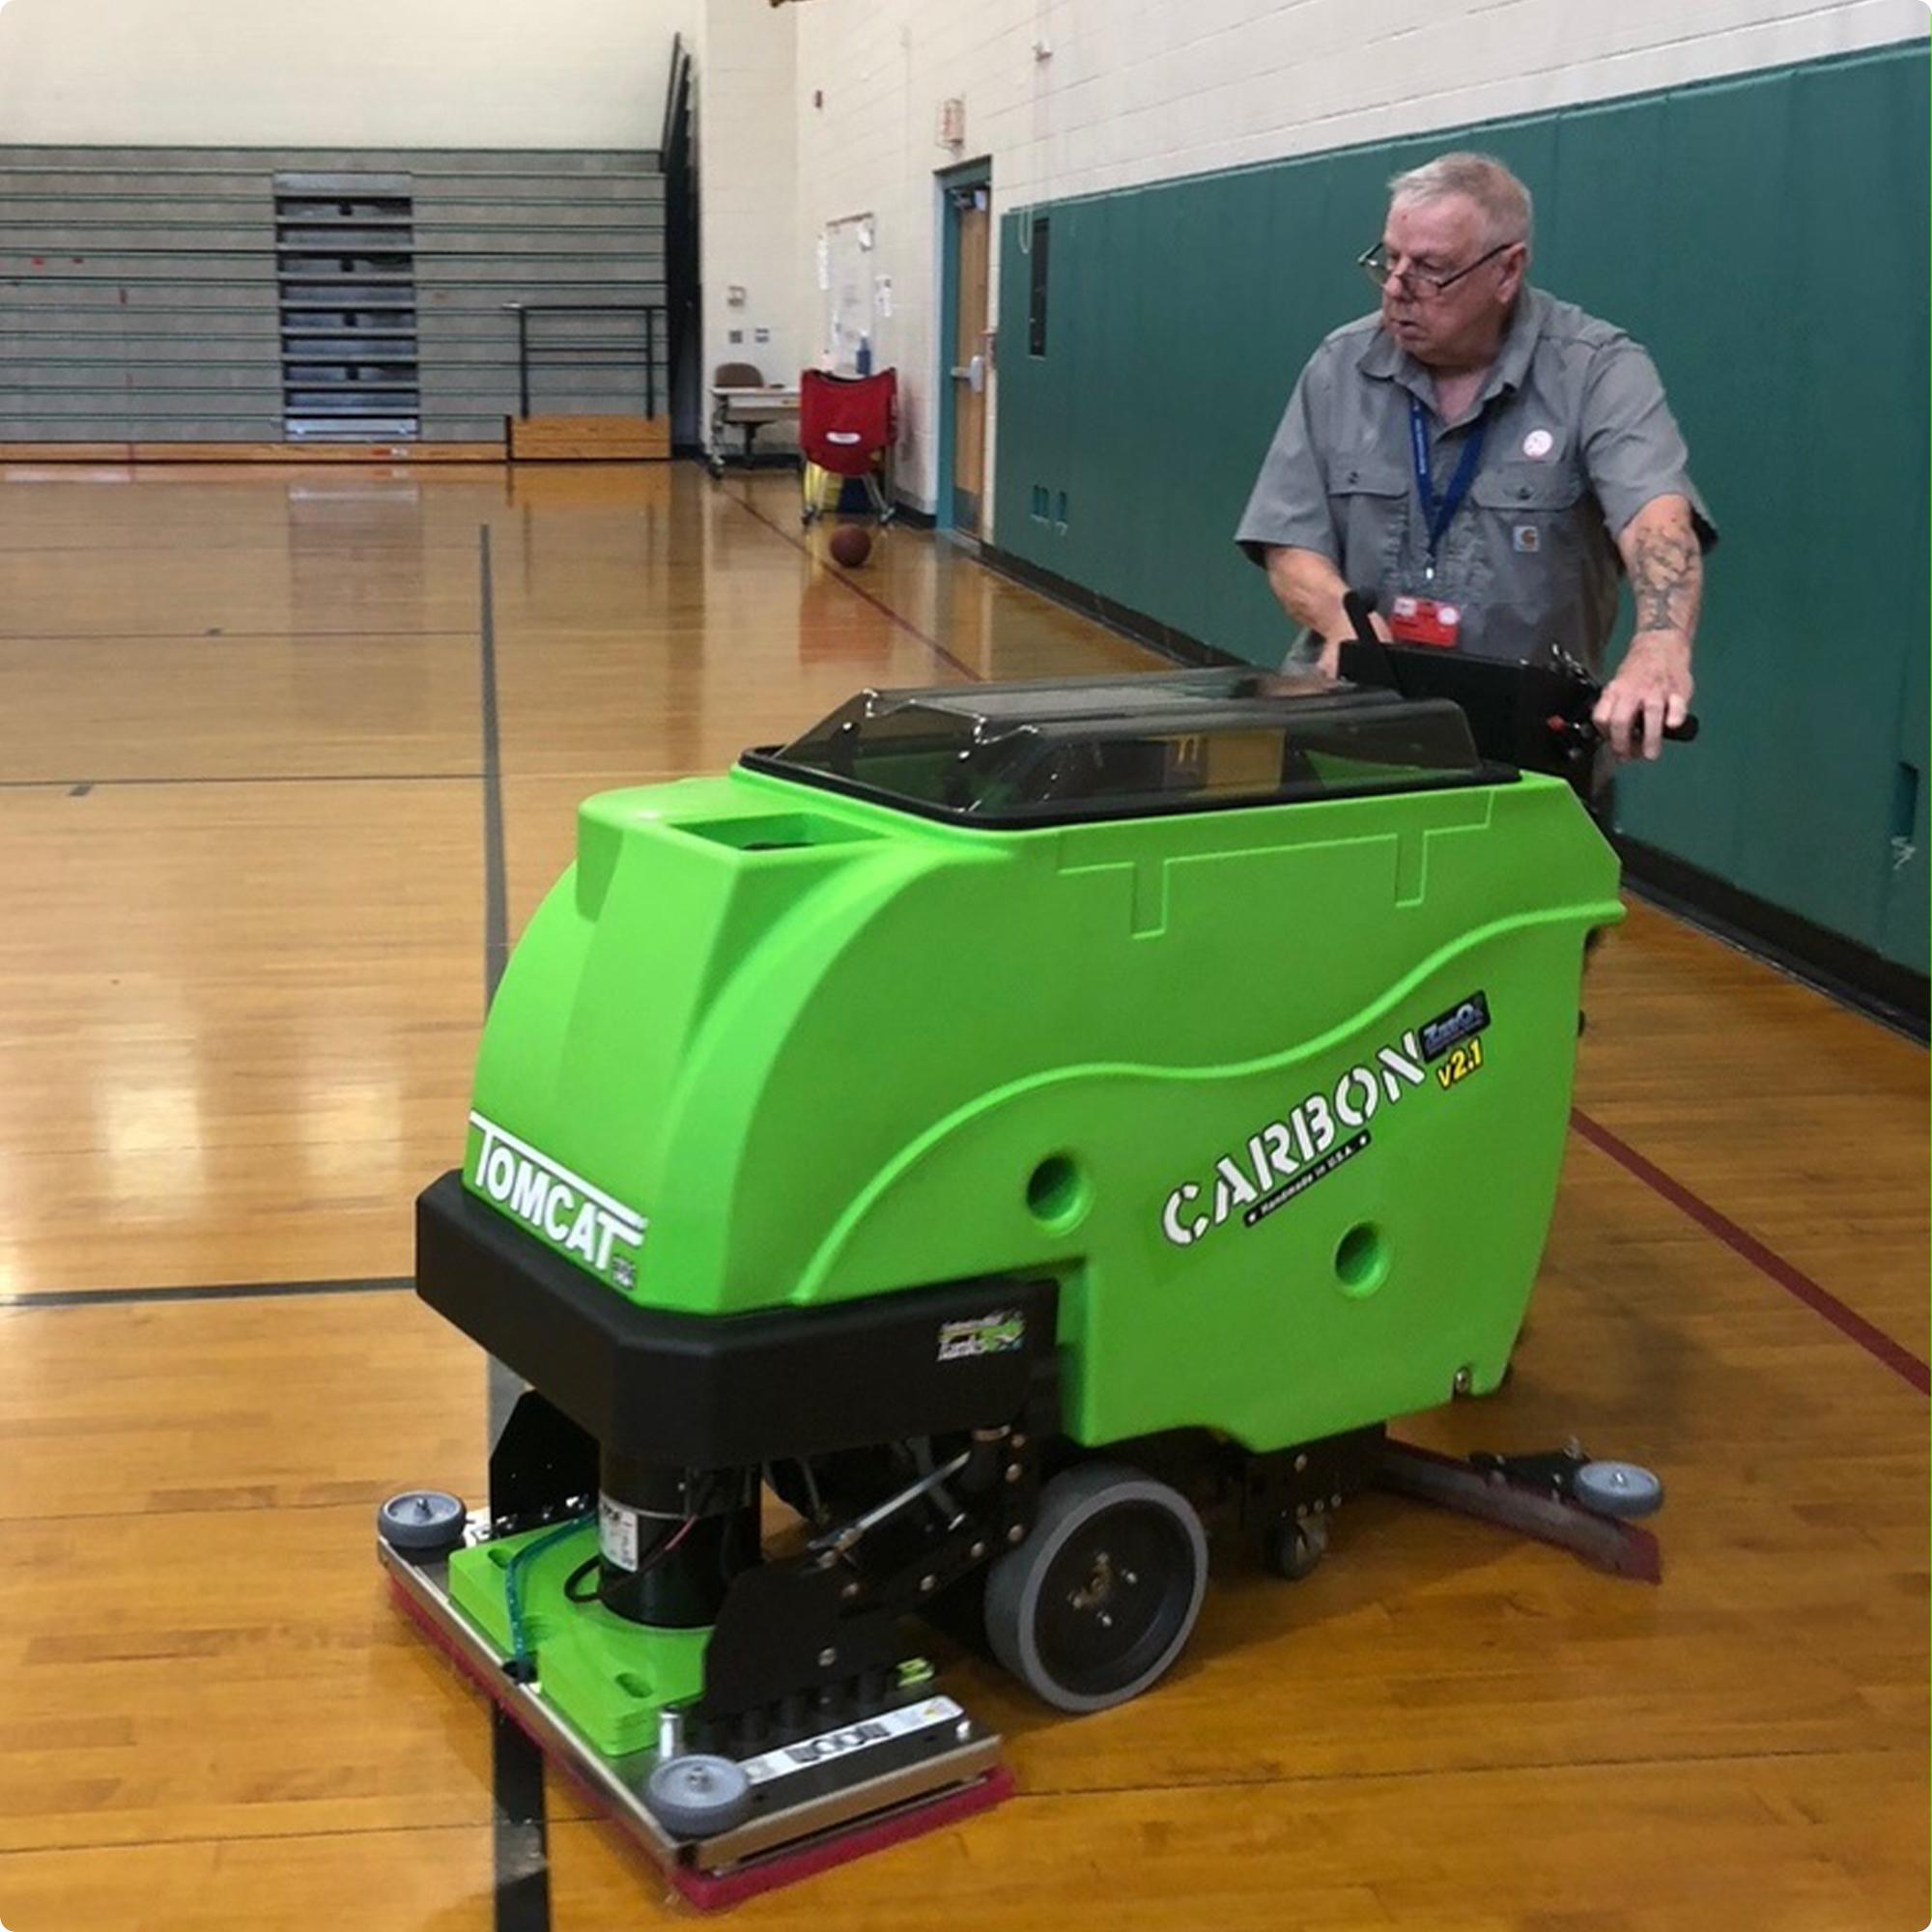 Tomcat Carbon 28" EDGE Walk Behind  Floor Scubber with Anti-Microbial Tank Option cleaning a wood floor in a gymnasium IMG0003